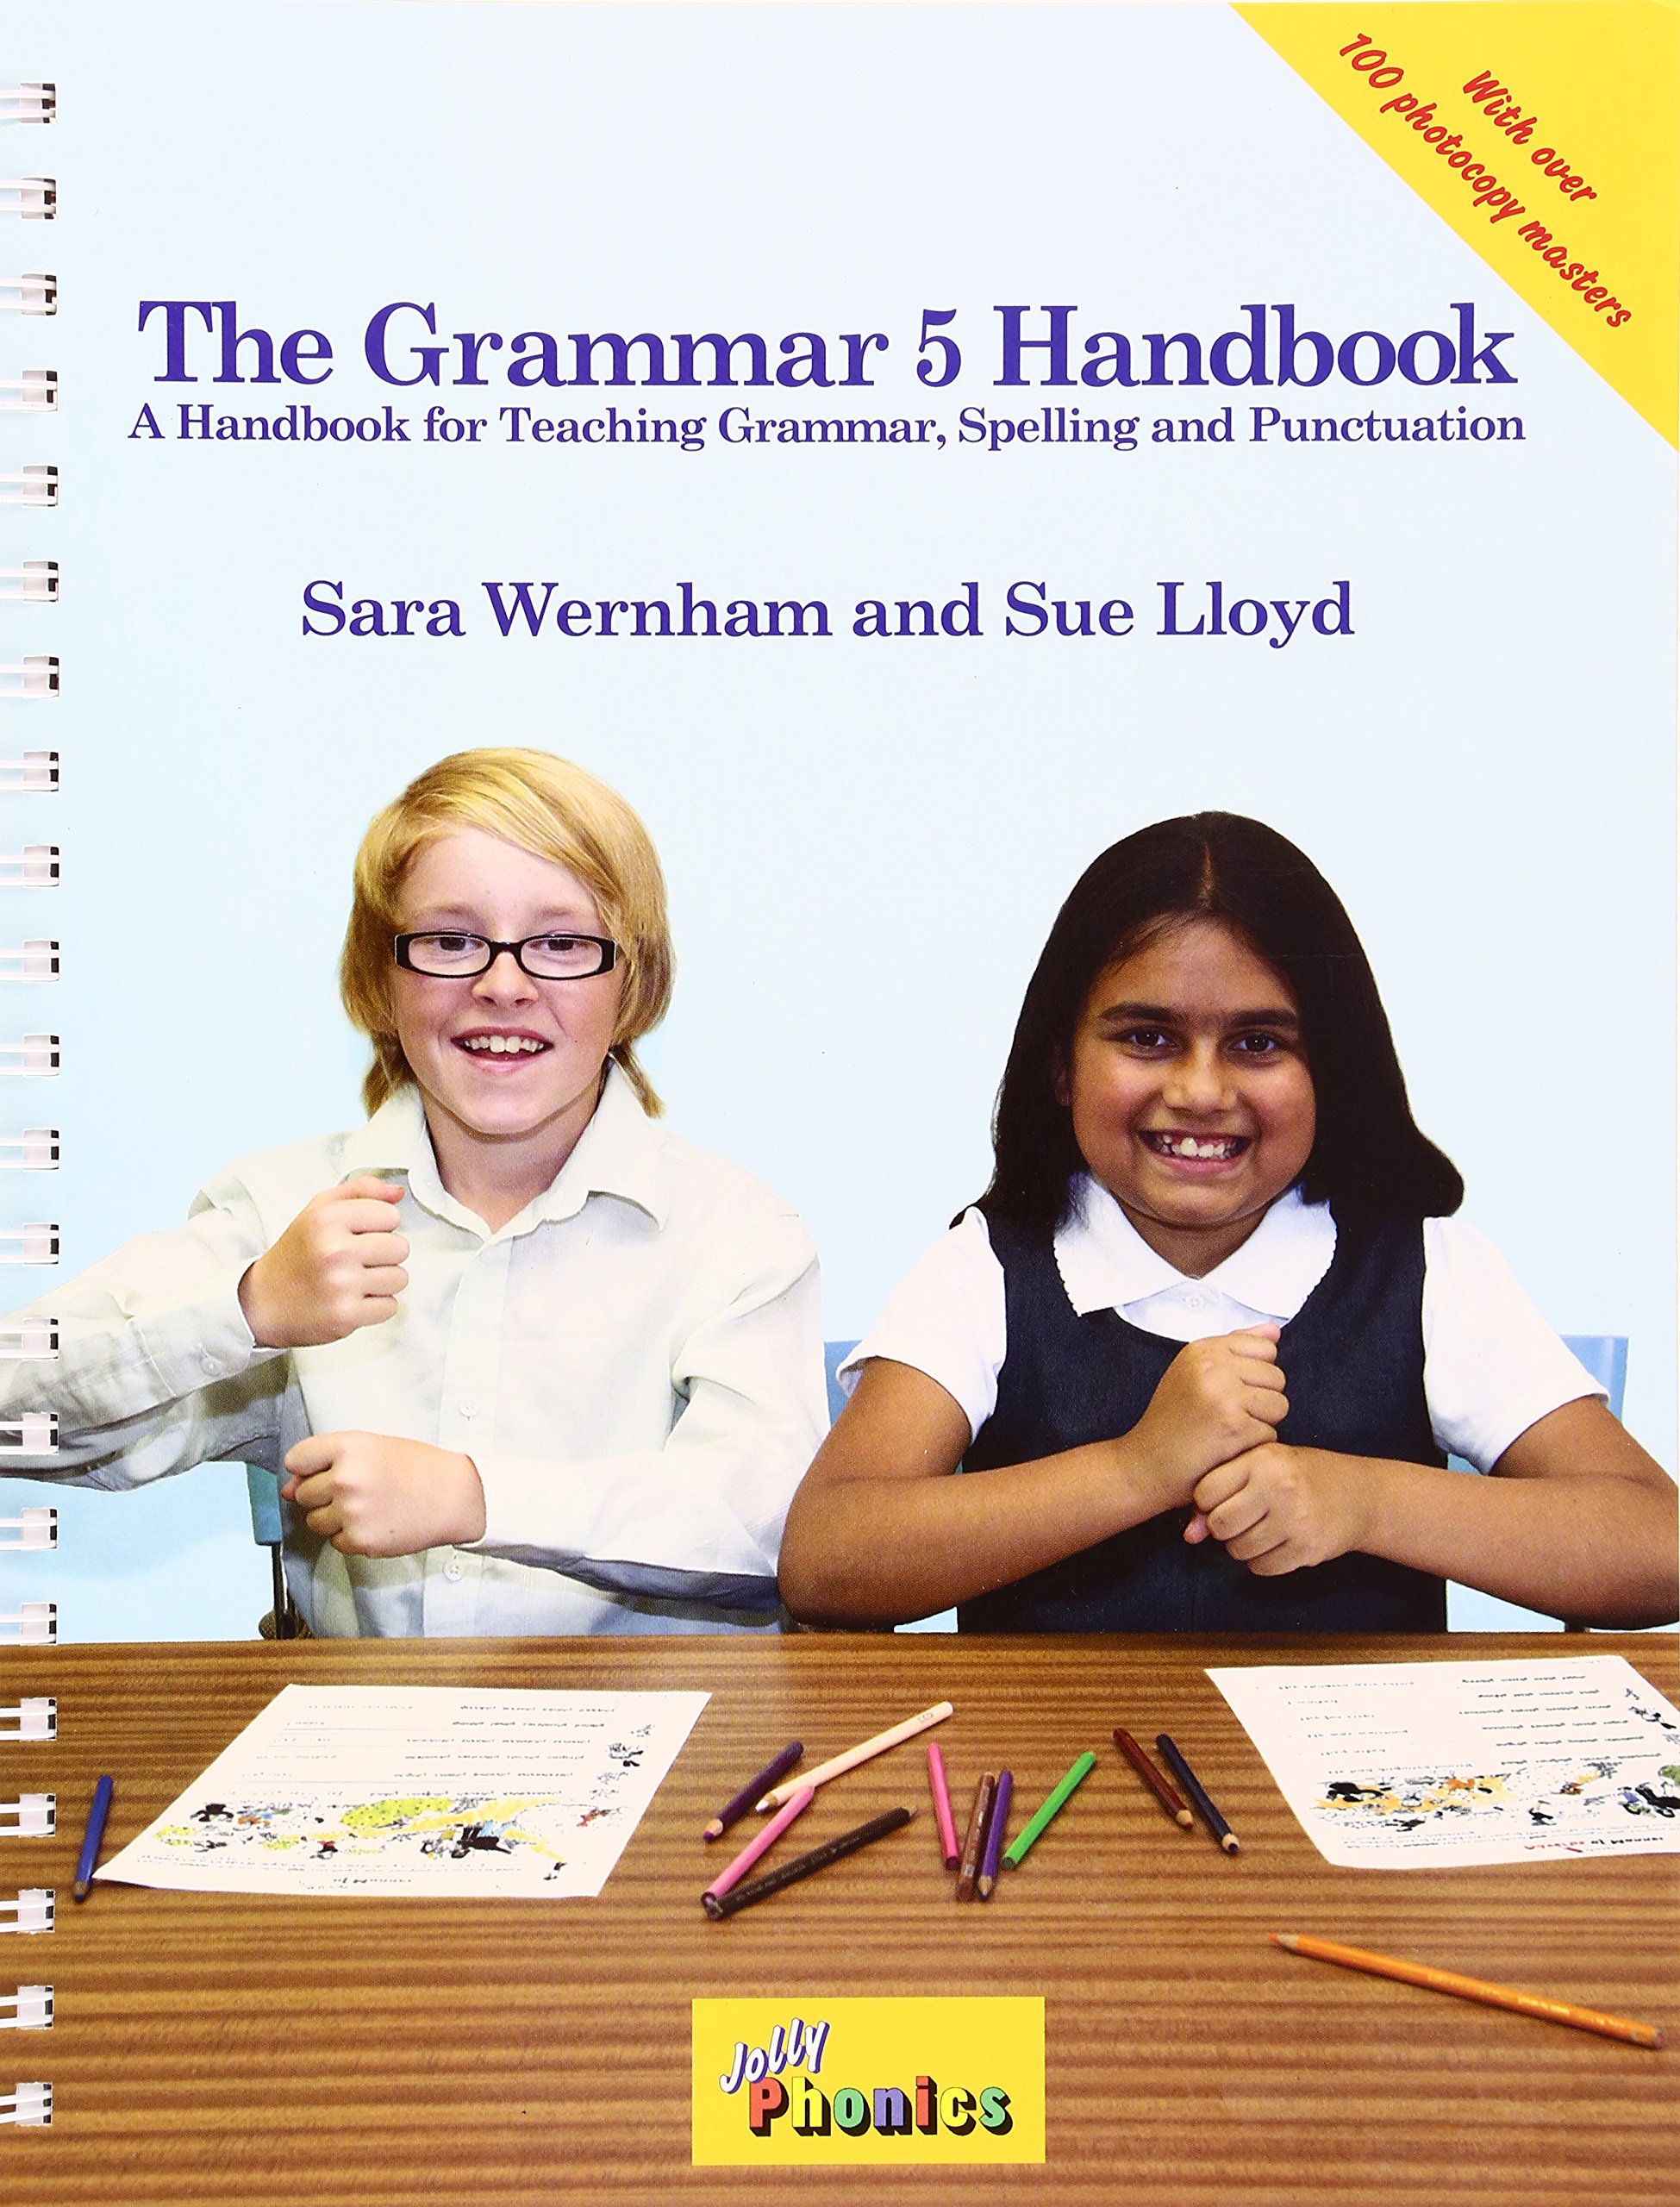 The Grammar - A Handbook for Teaching Grammar, Spelling and Punctuation 